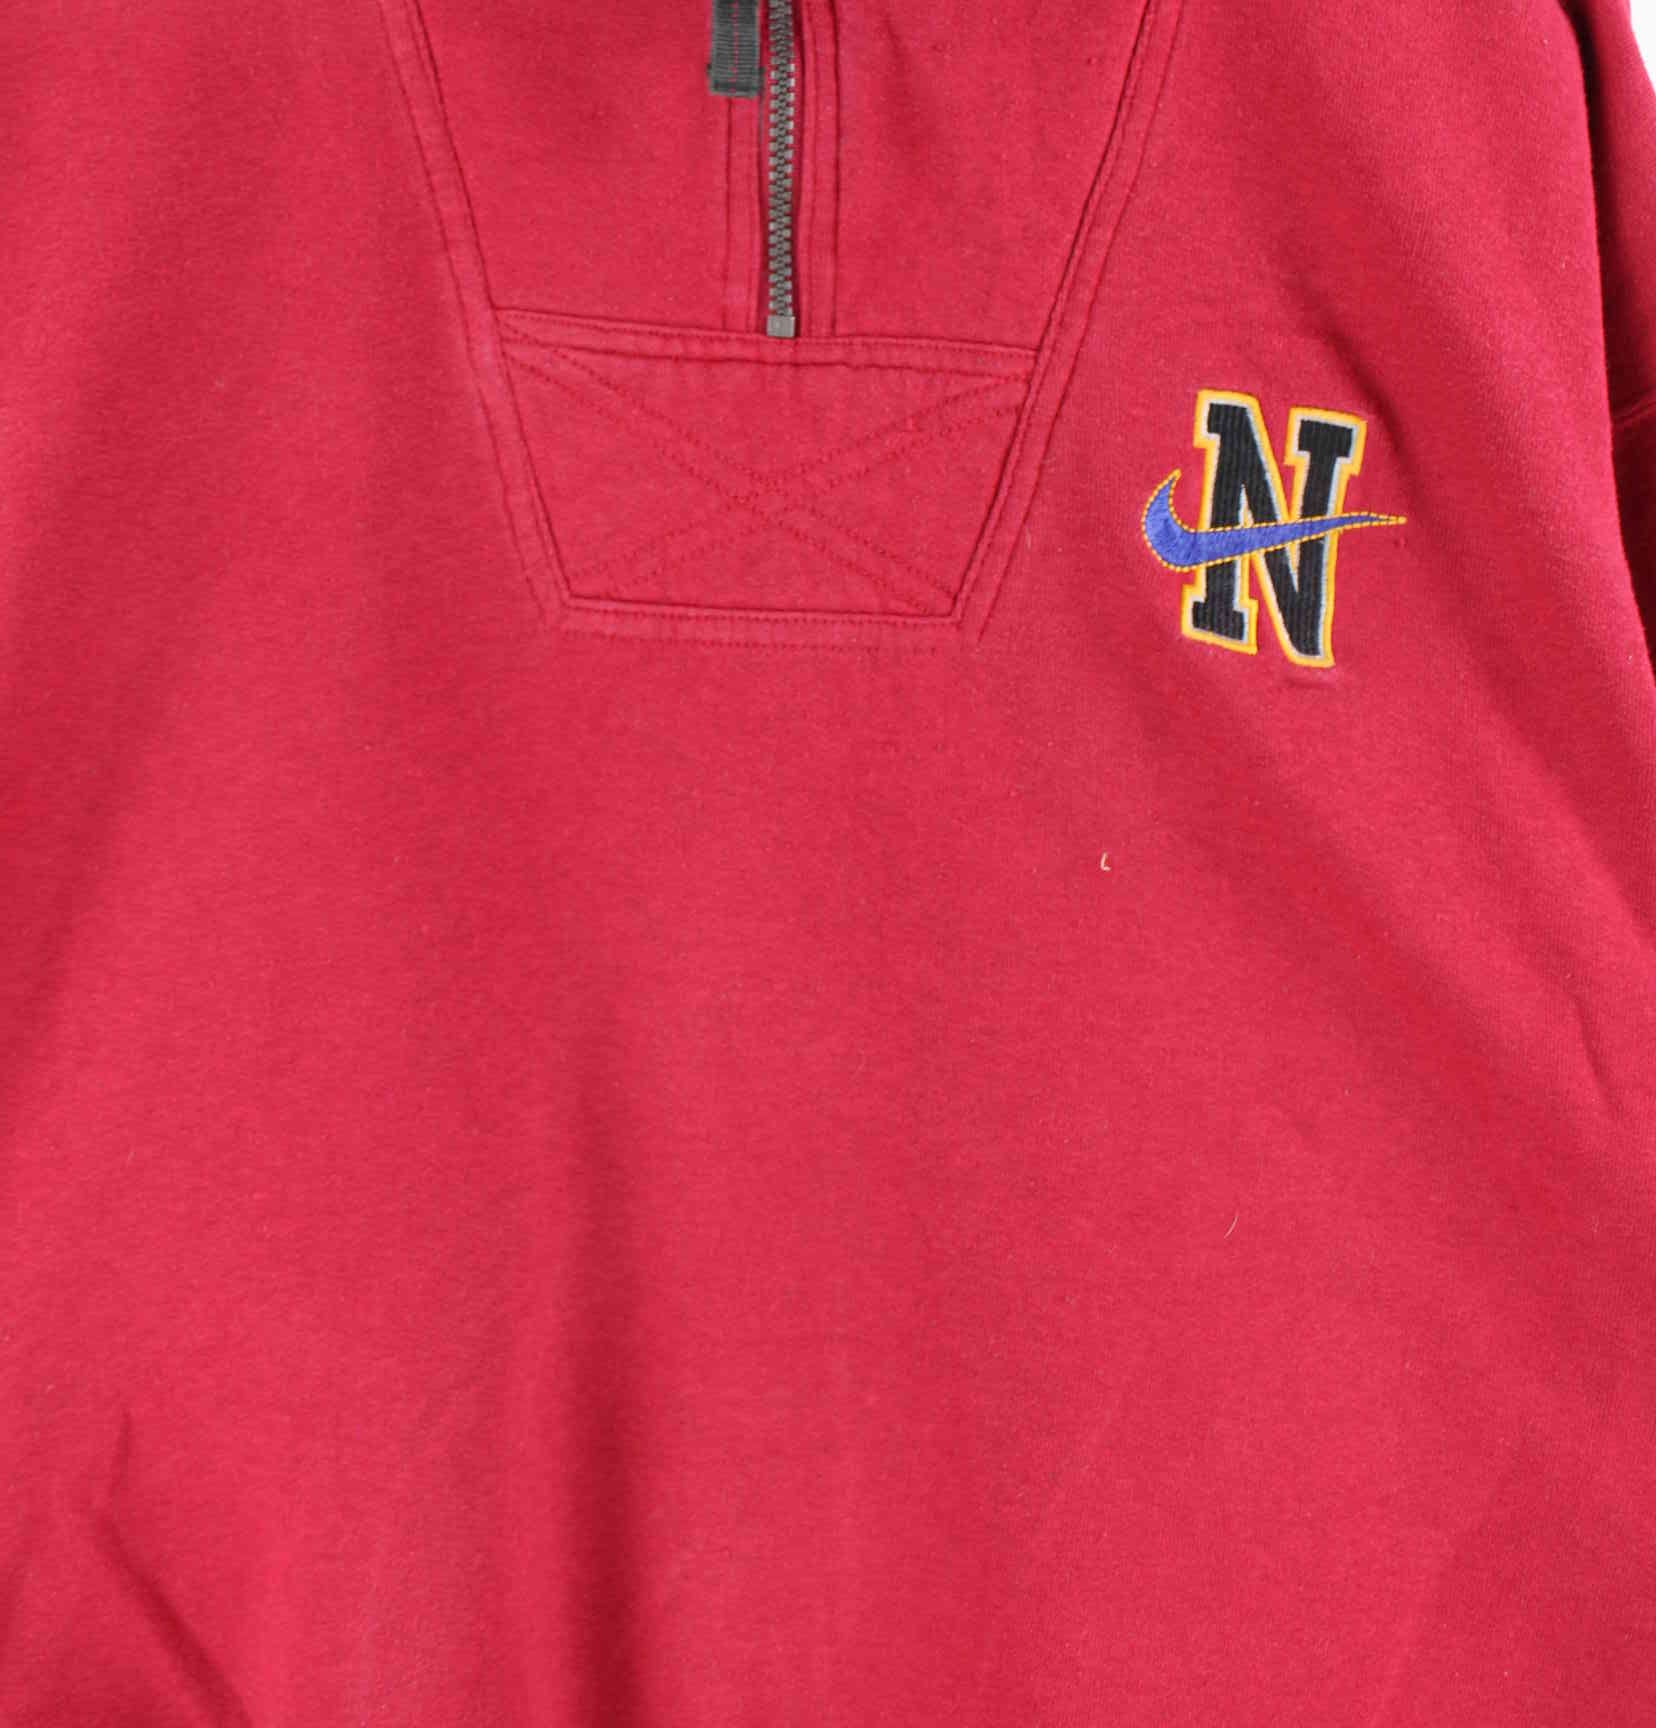 Nike 90s Vintage Embroidered Half Zip Sweater Rot L (detail image 1)